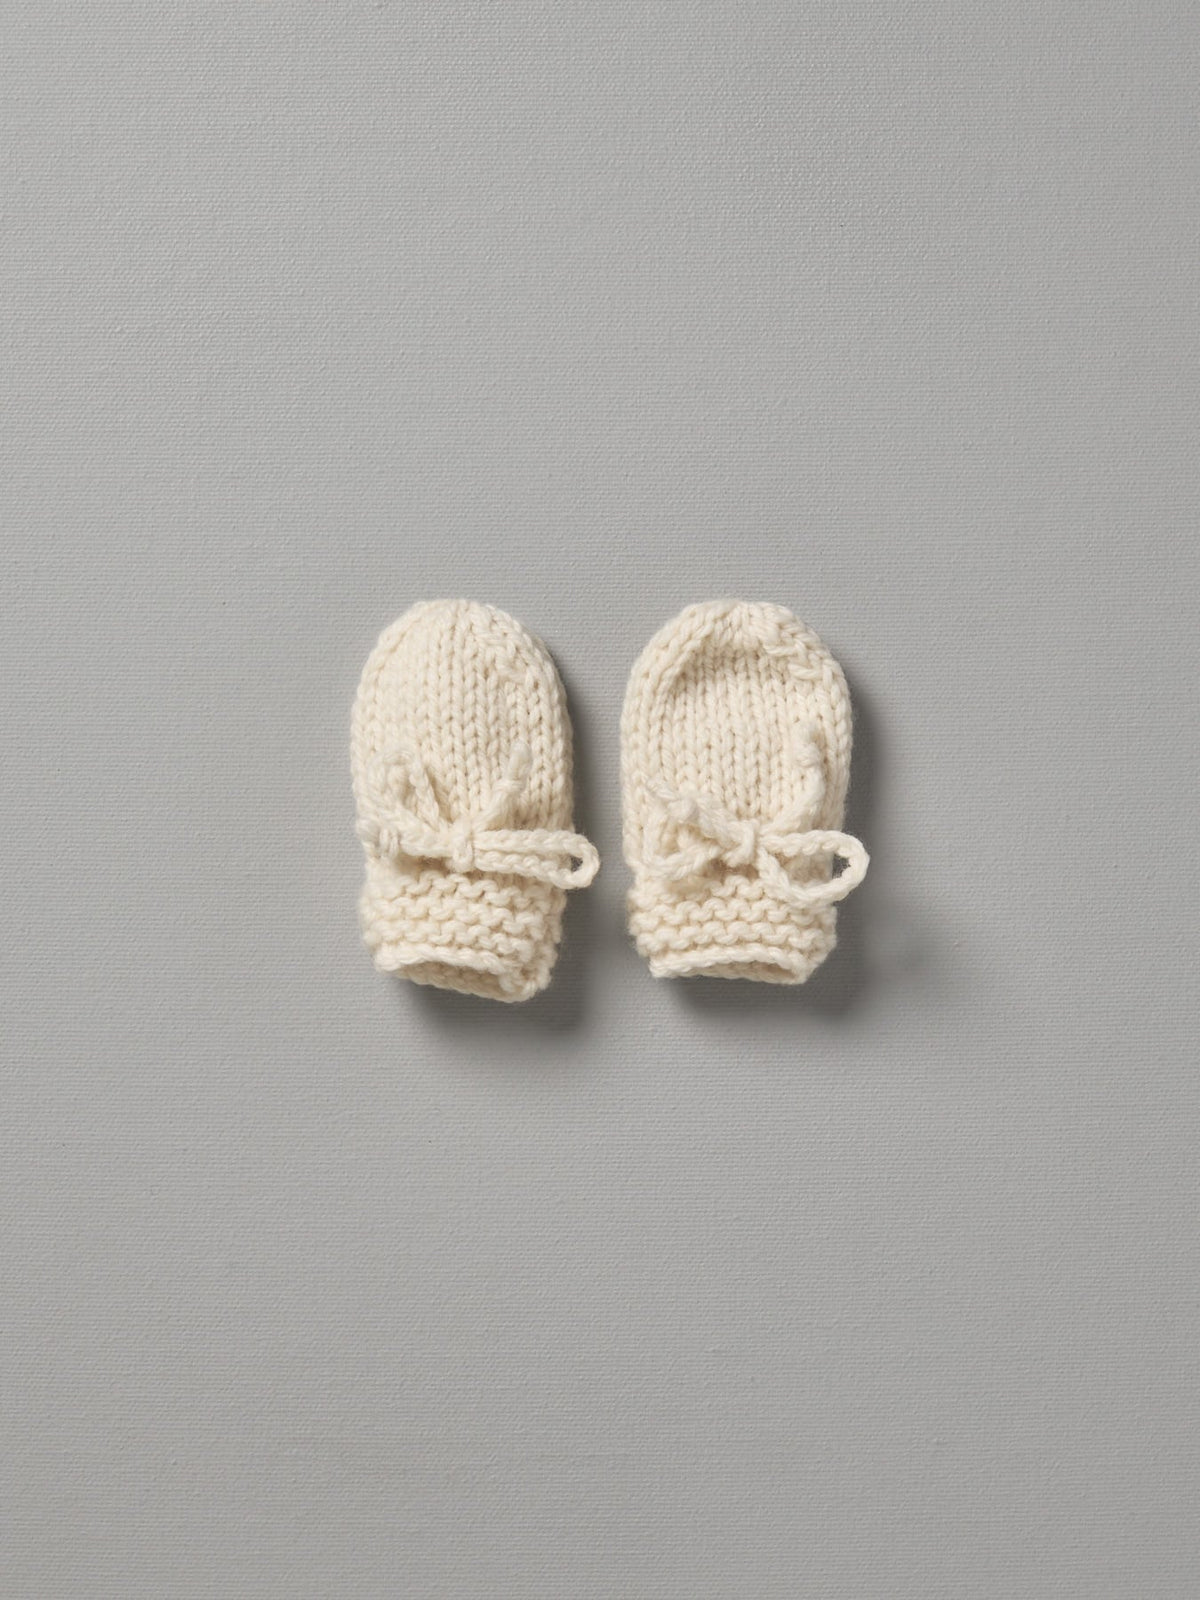 Two Weebits Hand Knitted Mittens on a grey surface.